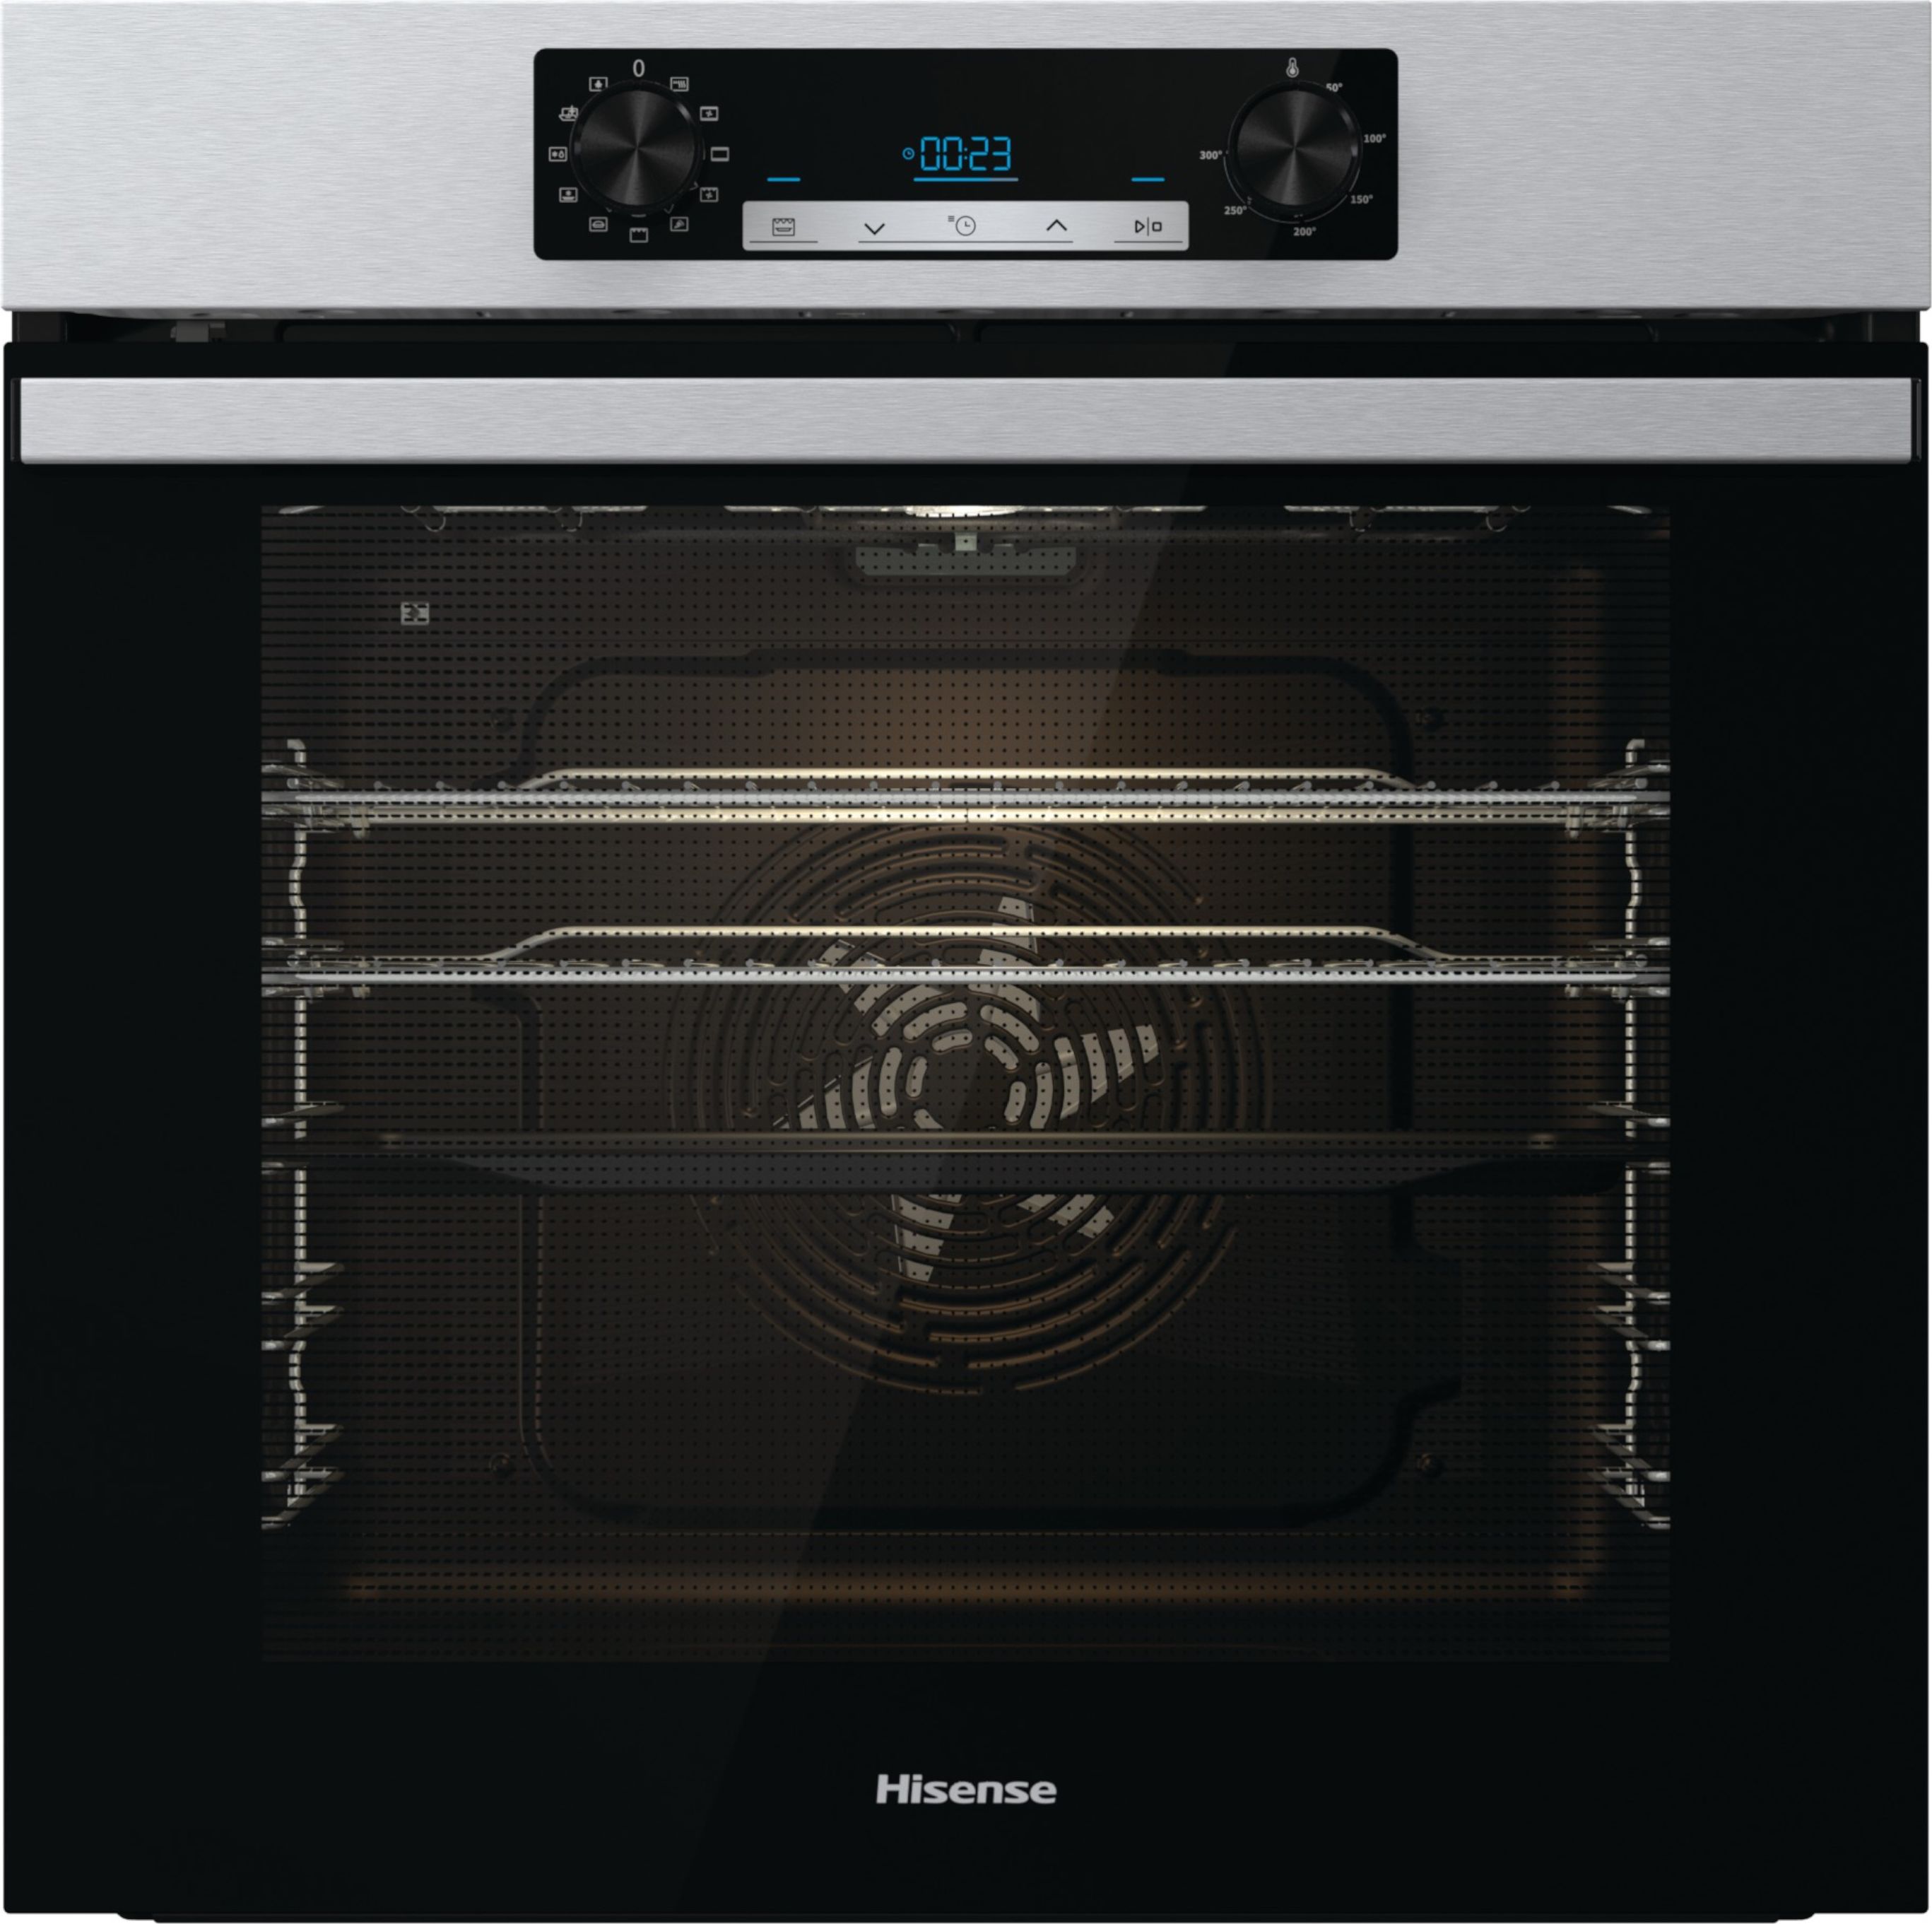 Hisense BI62211CX Built In Electric Single Oven - Stainless Steel - A Rated, Stainless Steel